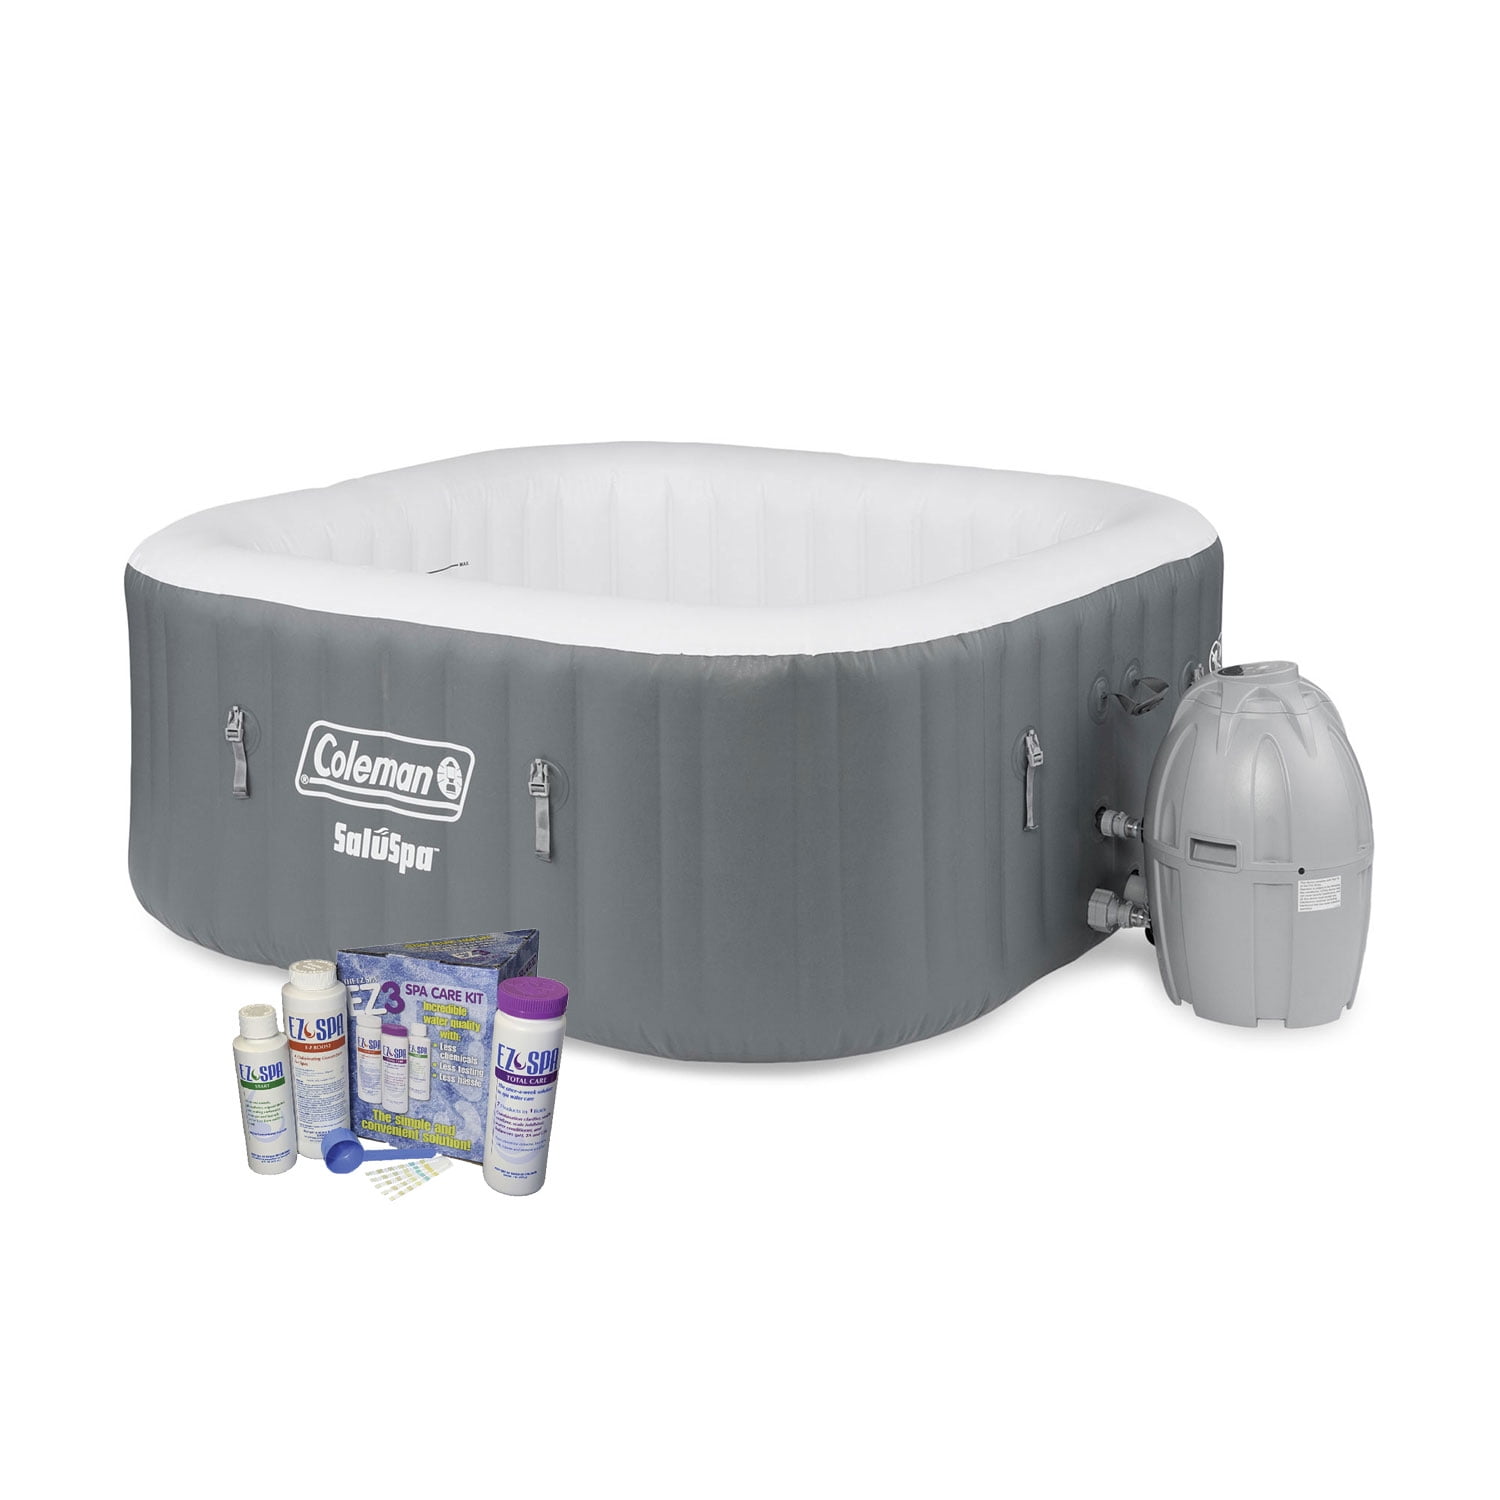 Coleman SaluSpa 4 Person Inflatable Spa and 3 Month Chemical Maintenance Kit 